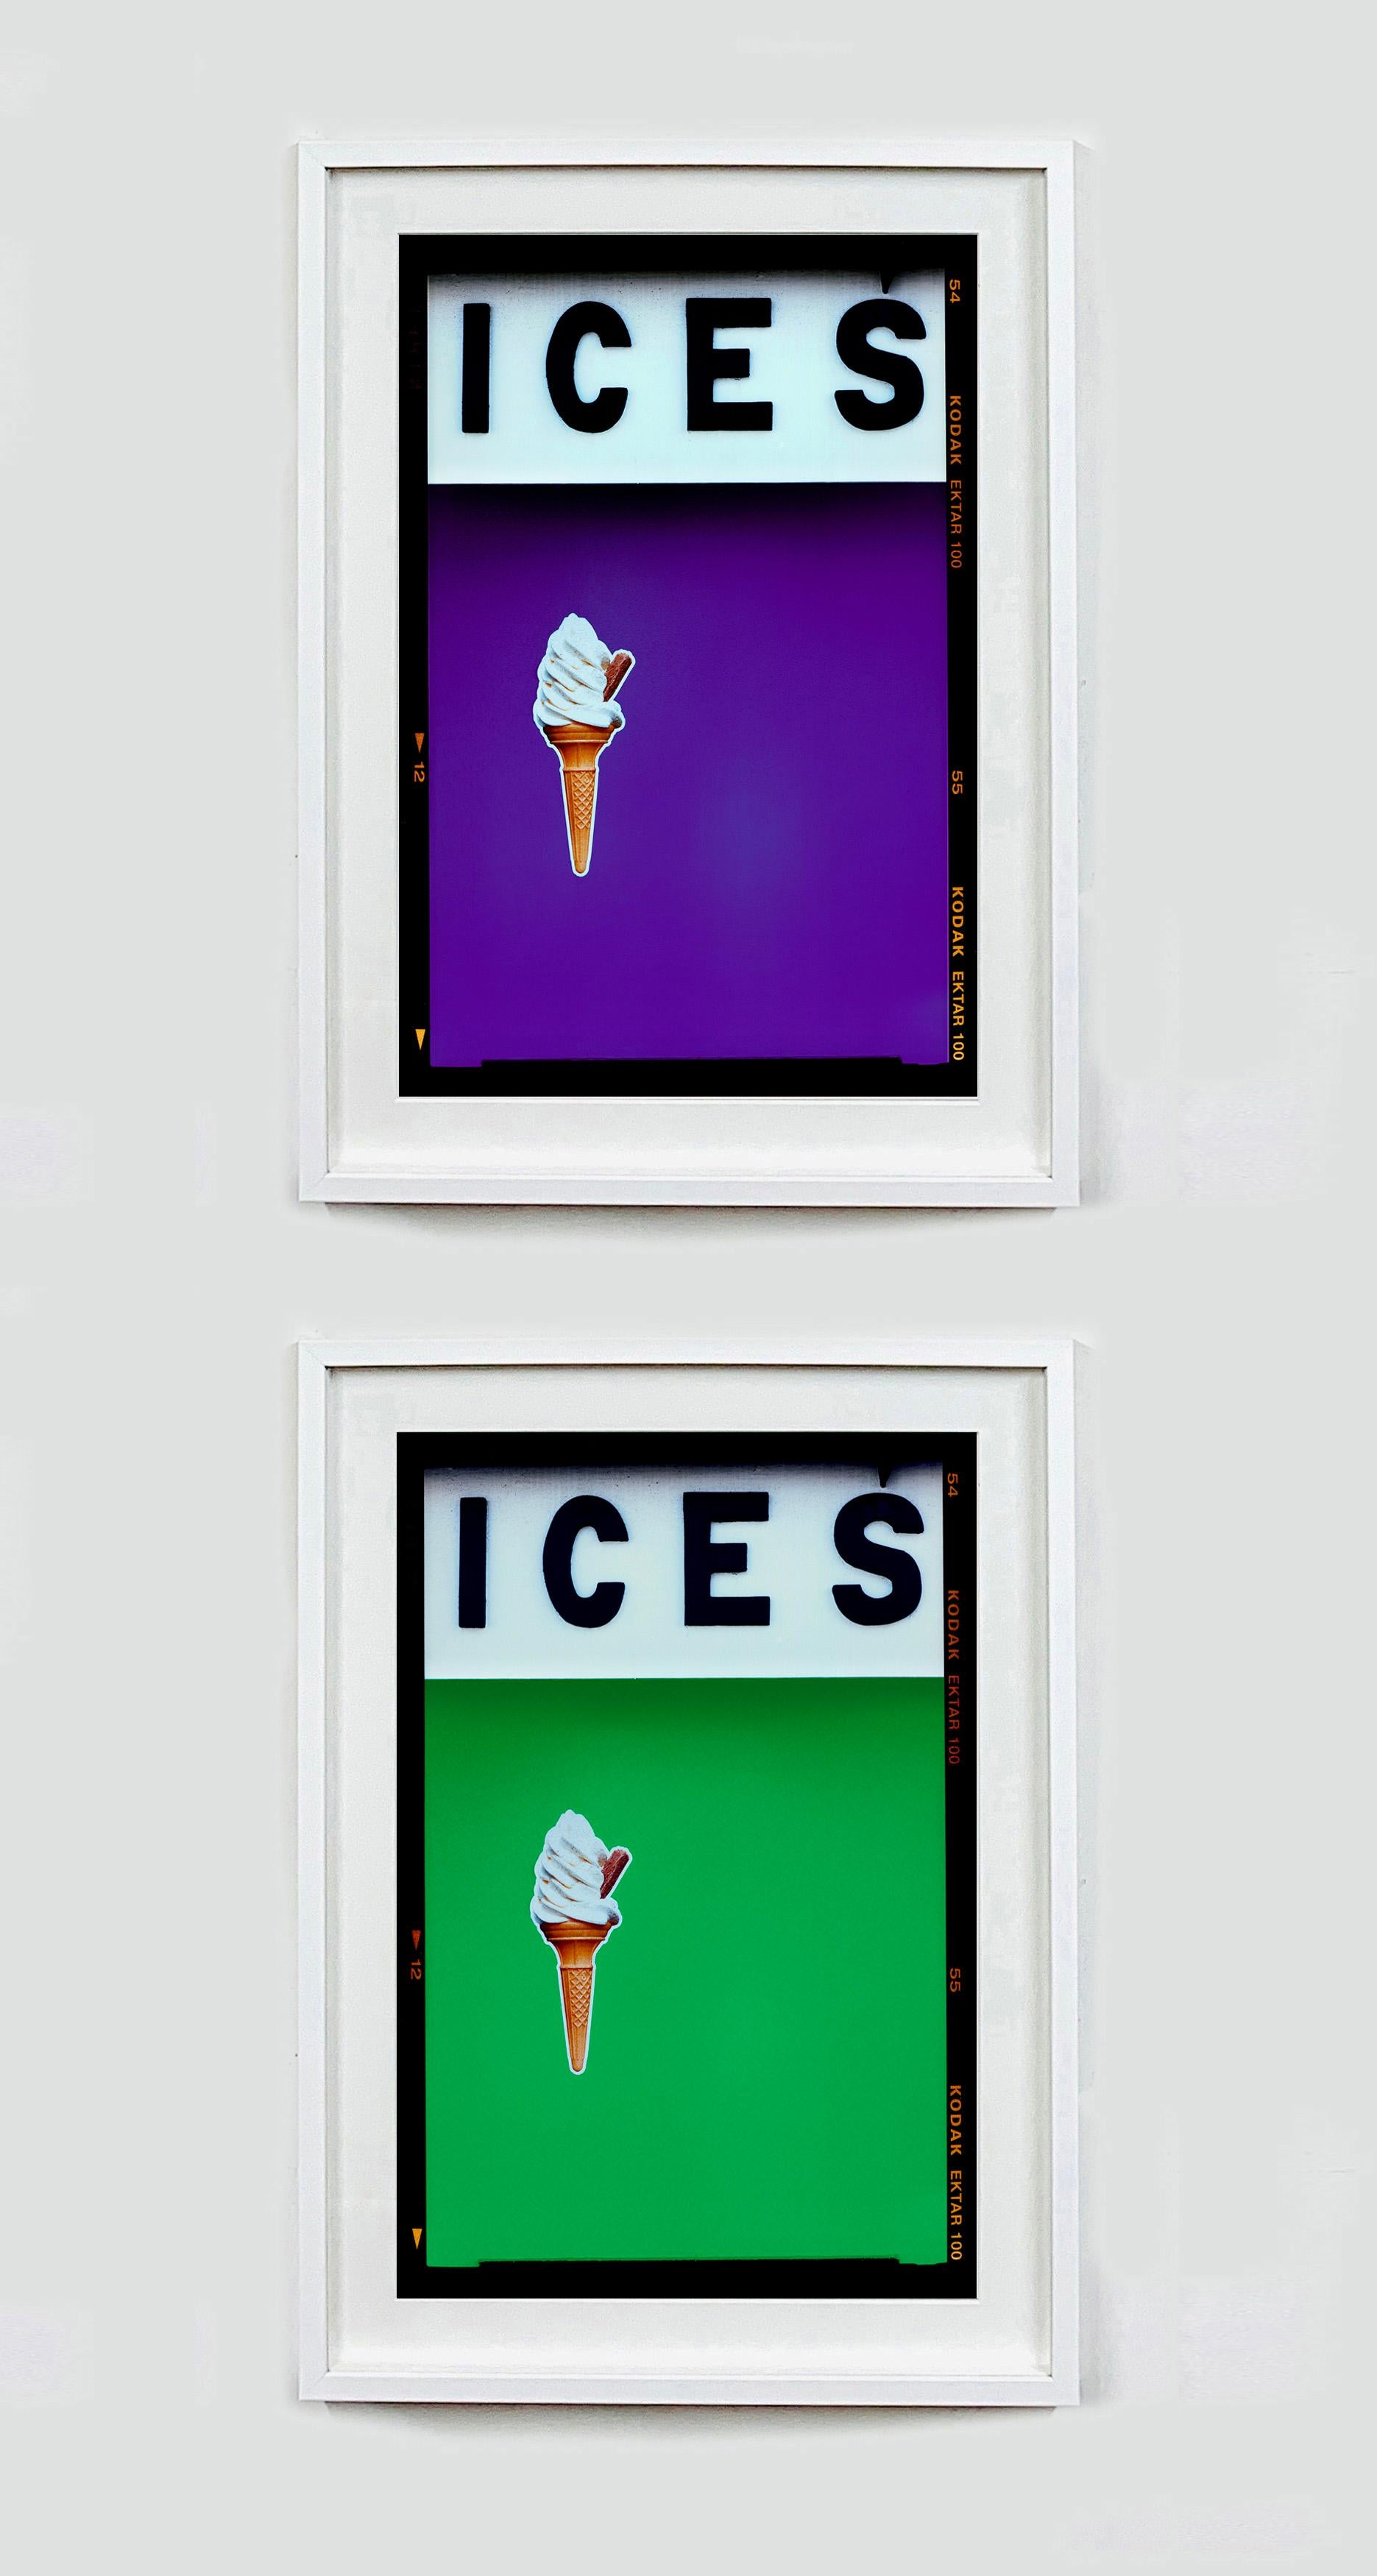 ICES, by Richard Heeps, photographed at the British Seaside at the end of summer 2020. This artwork is about evoking memories of the simple joy of days by the beach. The green color blocking, typography and the surreal twist of the suspended ice